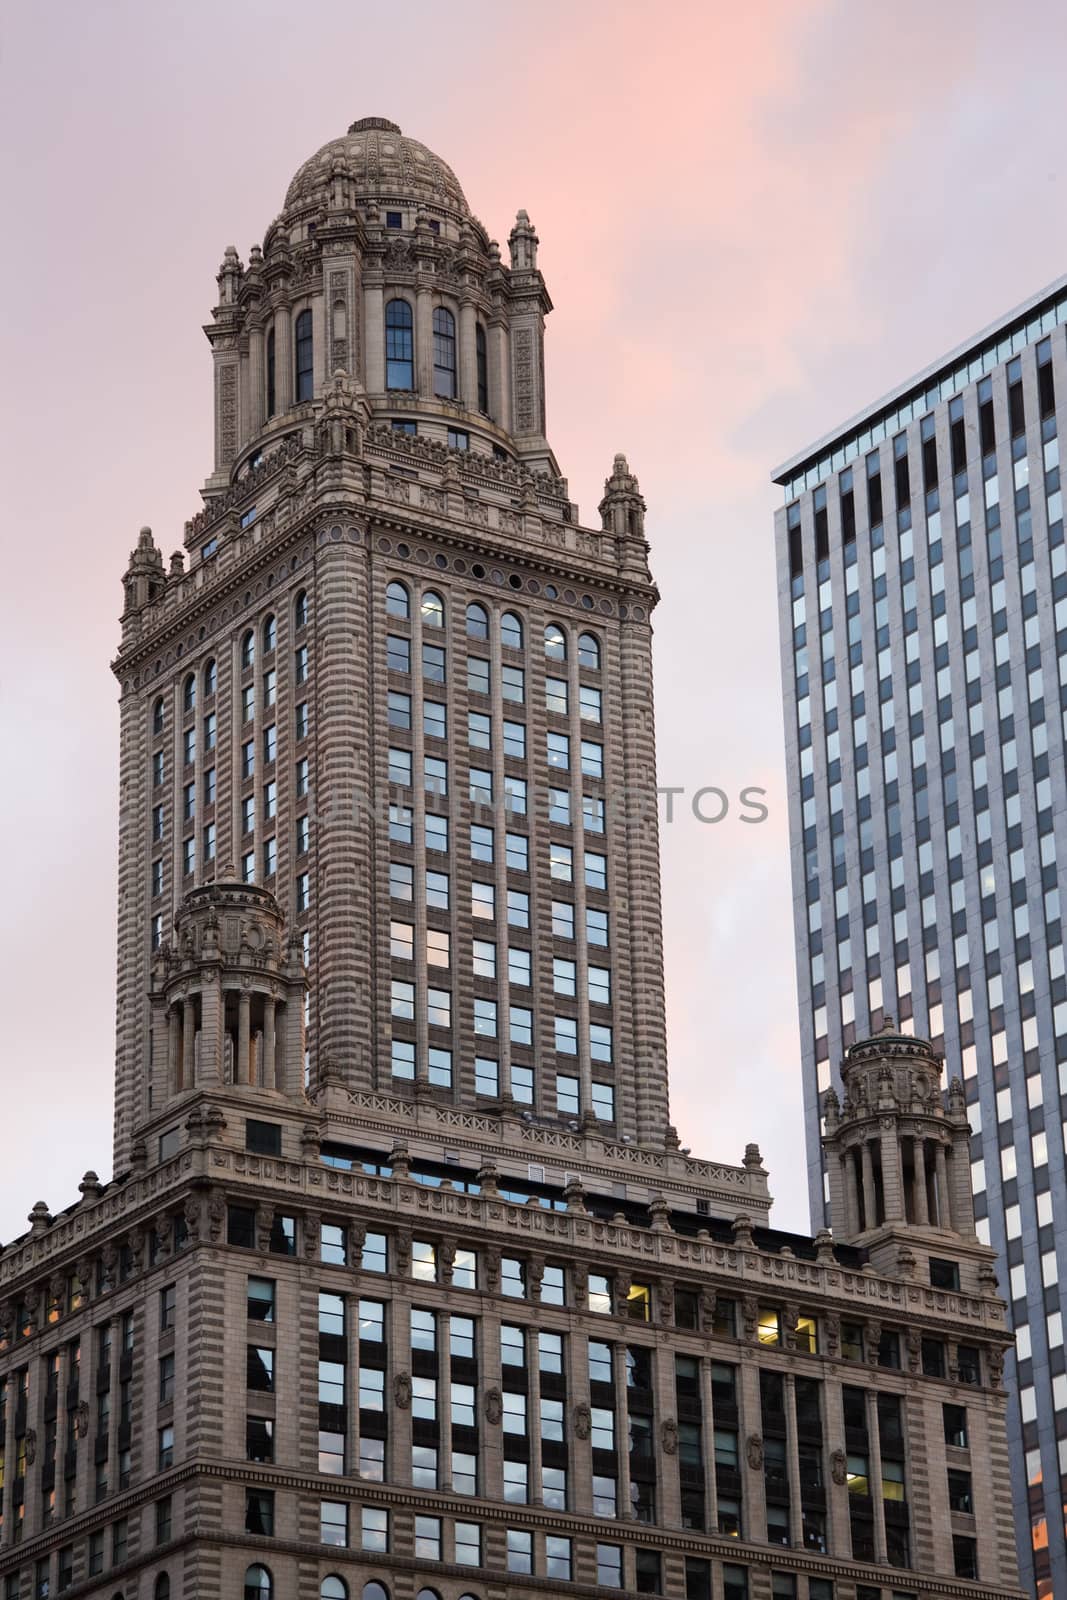 Historic building in downtown Chicago - sunset time. 35 East Wacker - North American Life Insurance Building